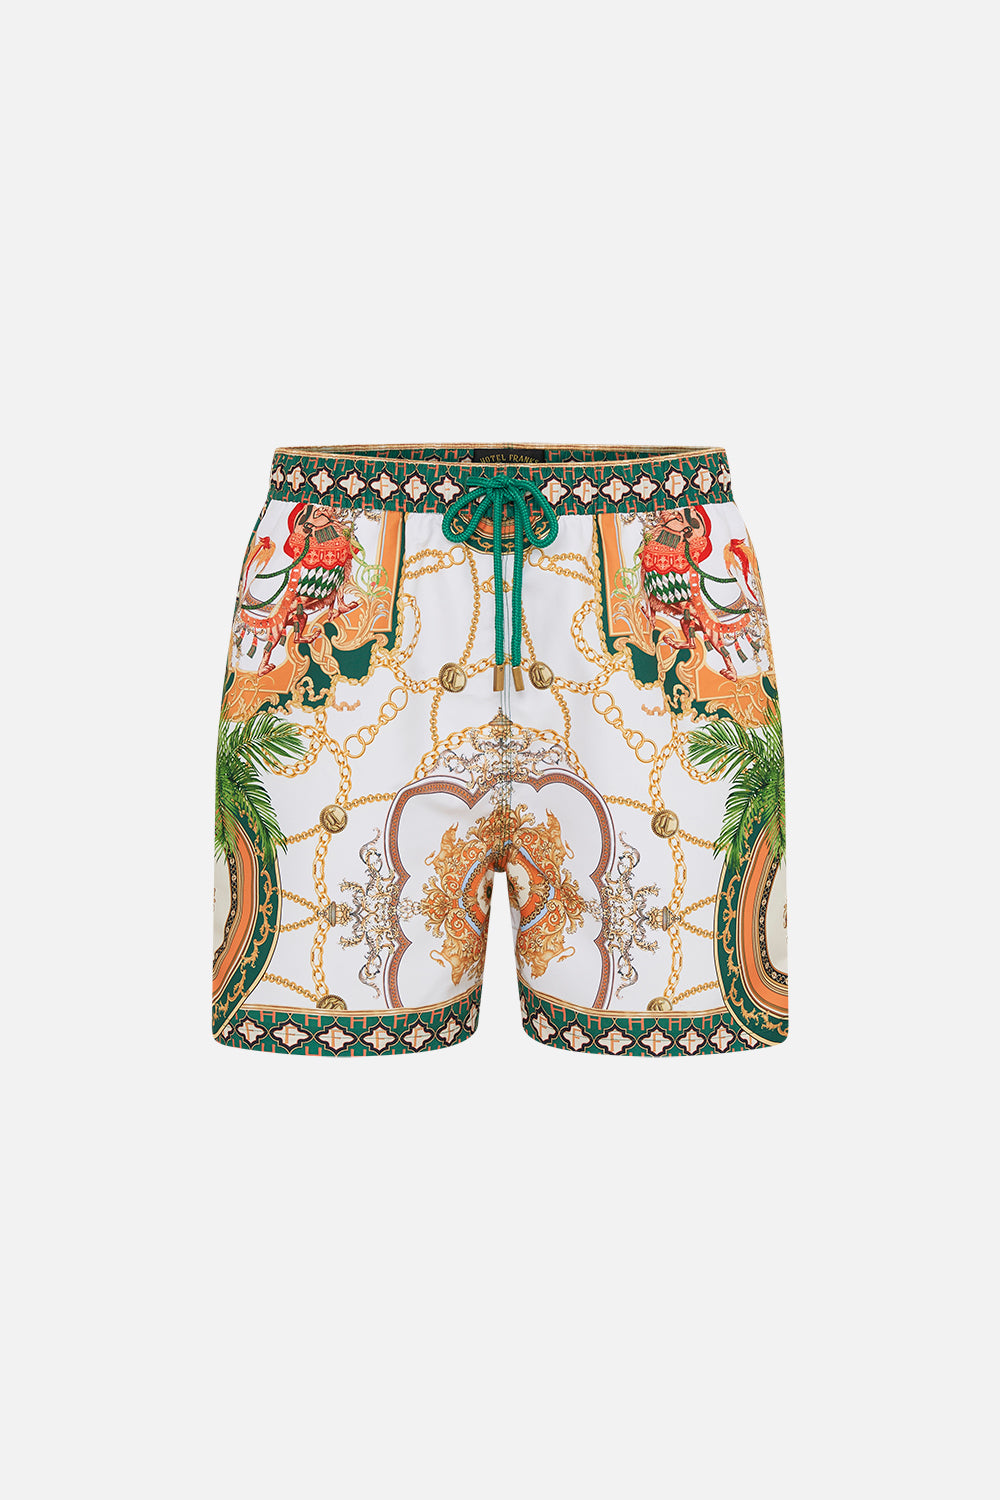 Product view of Hotel Franks by CAMILLA mens white boardshorts in My Sweet Devotion print